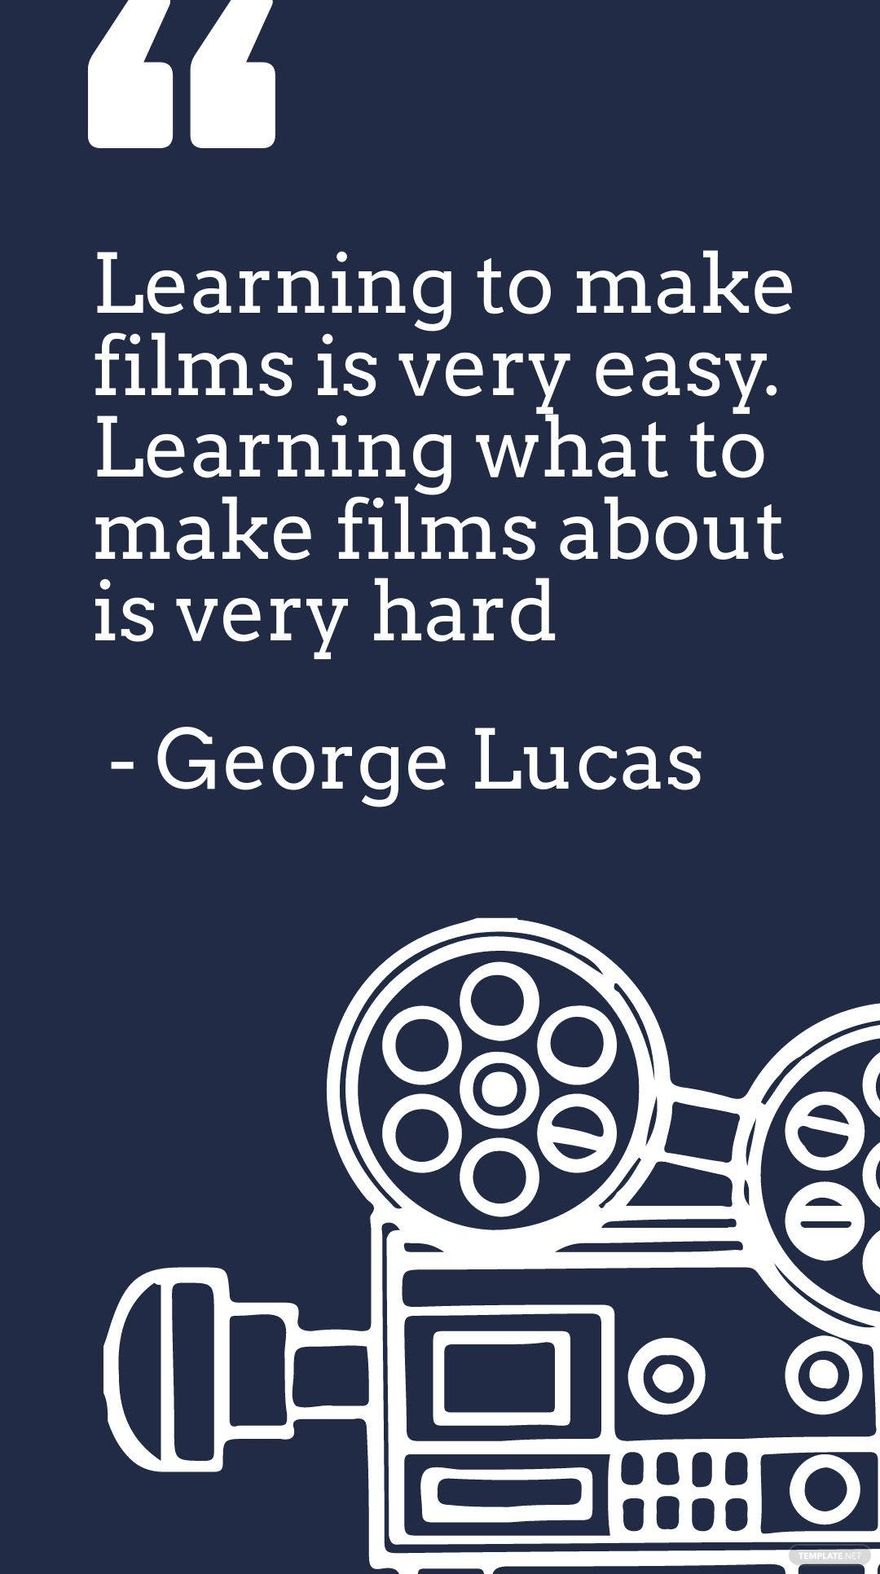 George Lucas-Learning to make films is very easy. Learning what to make films about is very hard